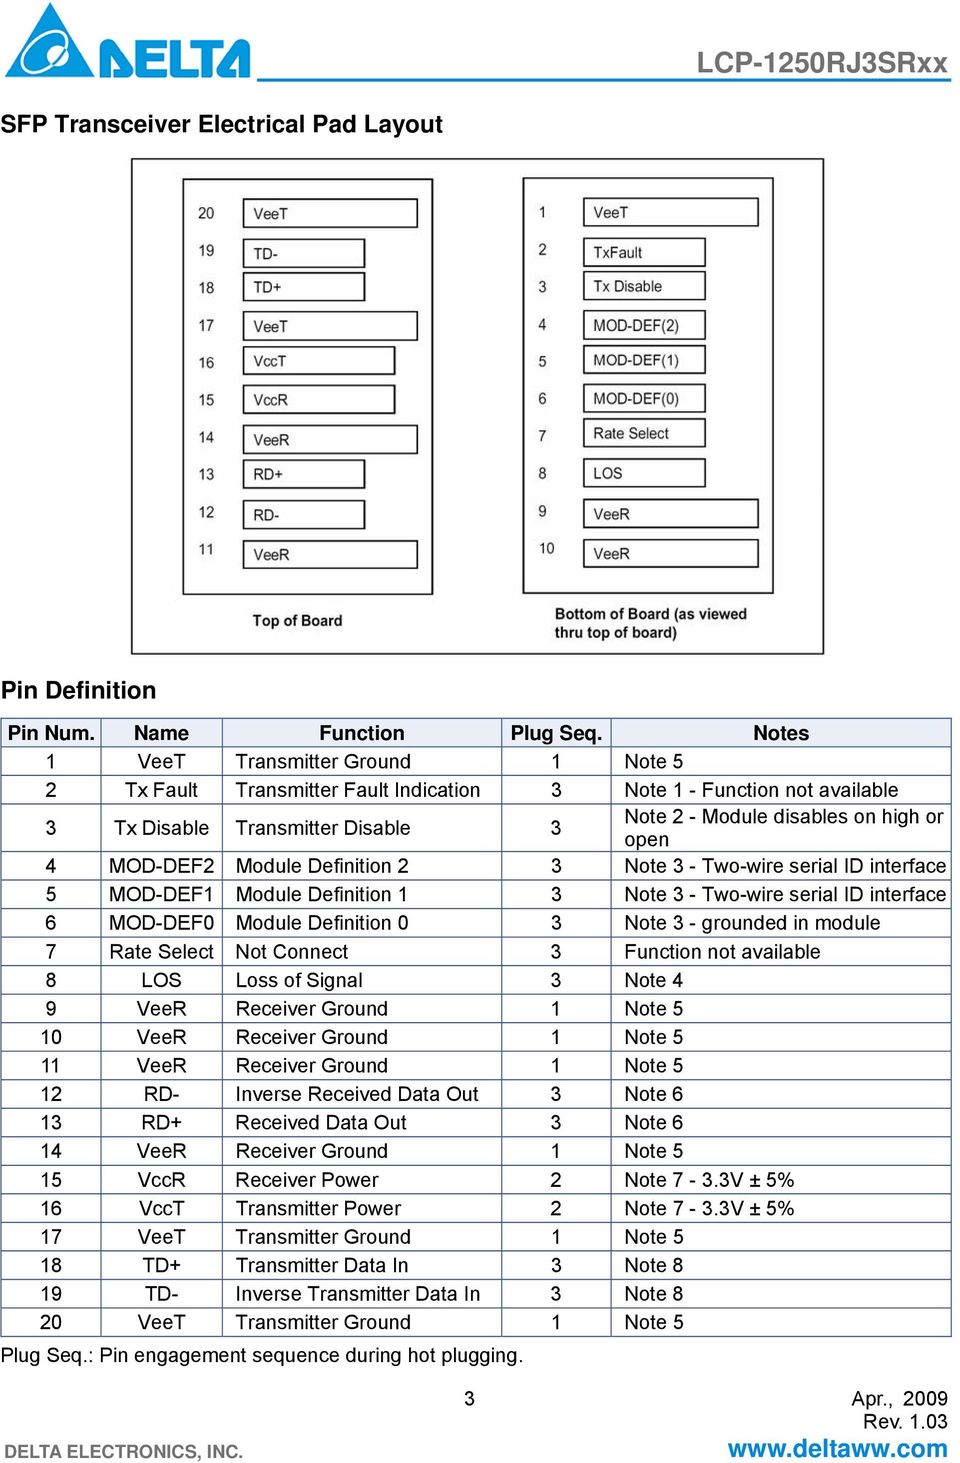 MOD-DEF2 Module Definition 2 3 Note 3 - Two-wire serial ID interface 5 MOD-DEF1 Module Definition 1 3 Note 3 - Two-wire serial ID interface 6 MOD-DEF0 Module Definition 0 3 Note 3 - grounded in